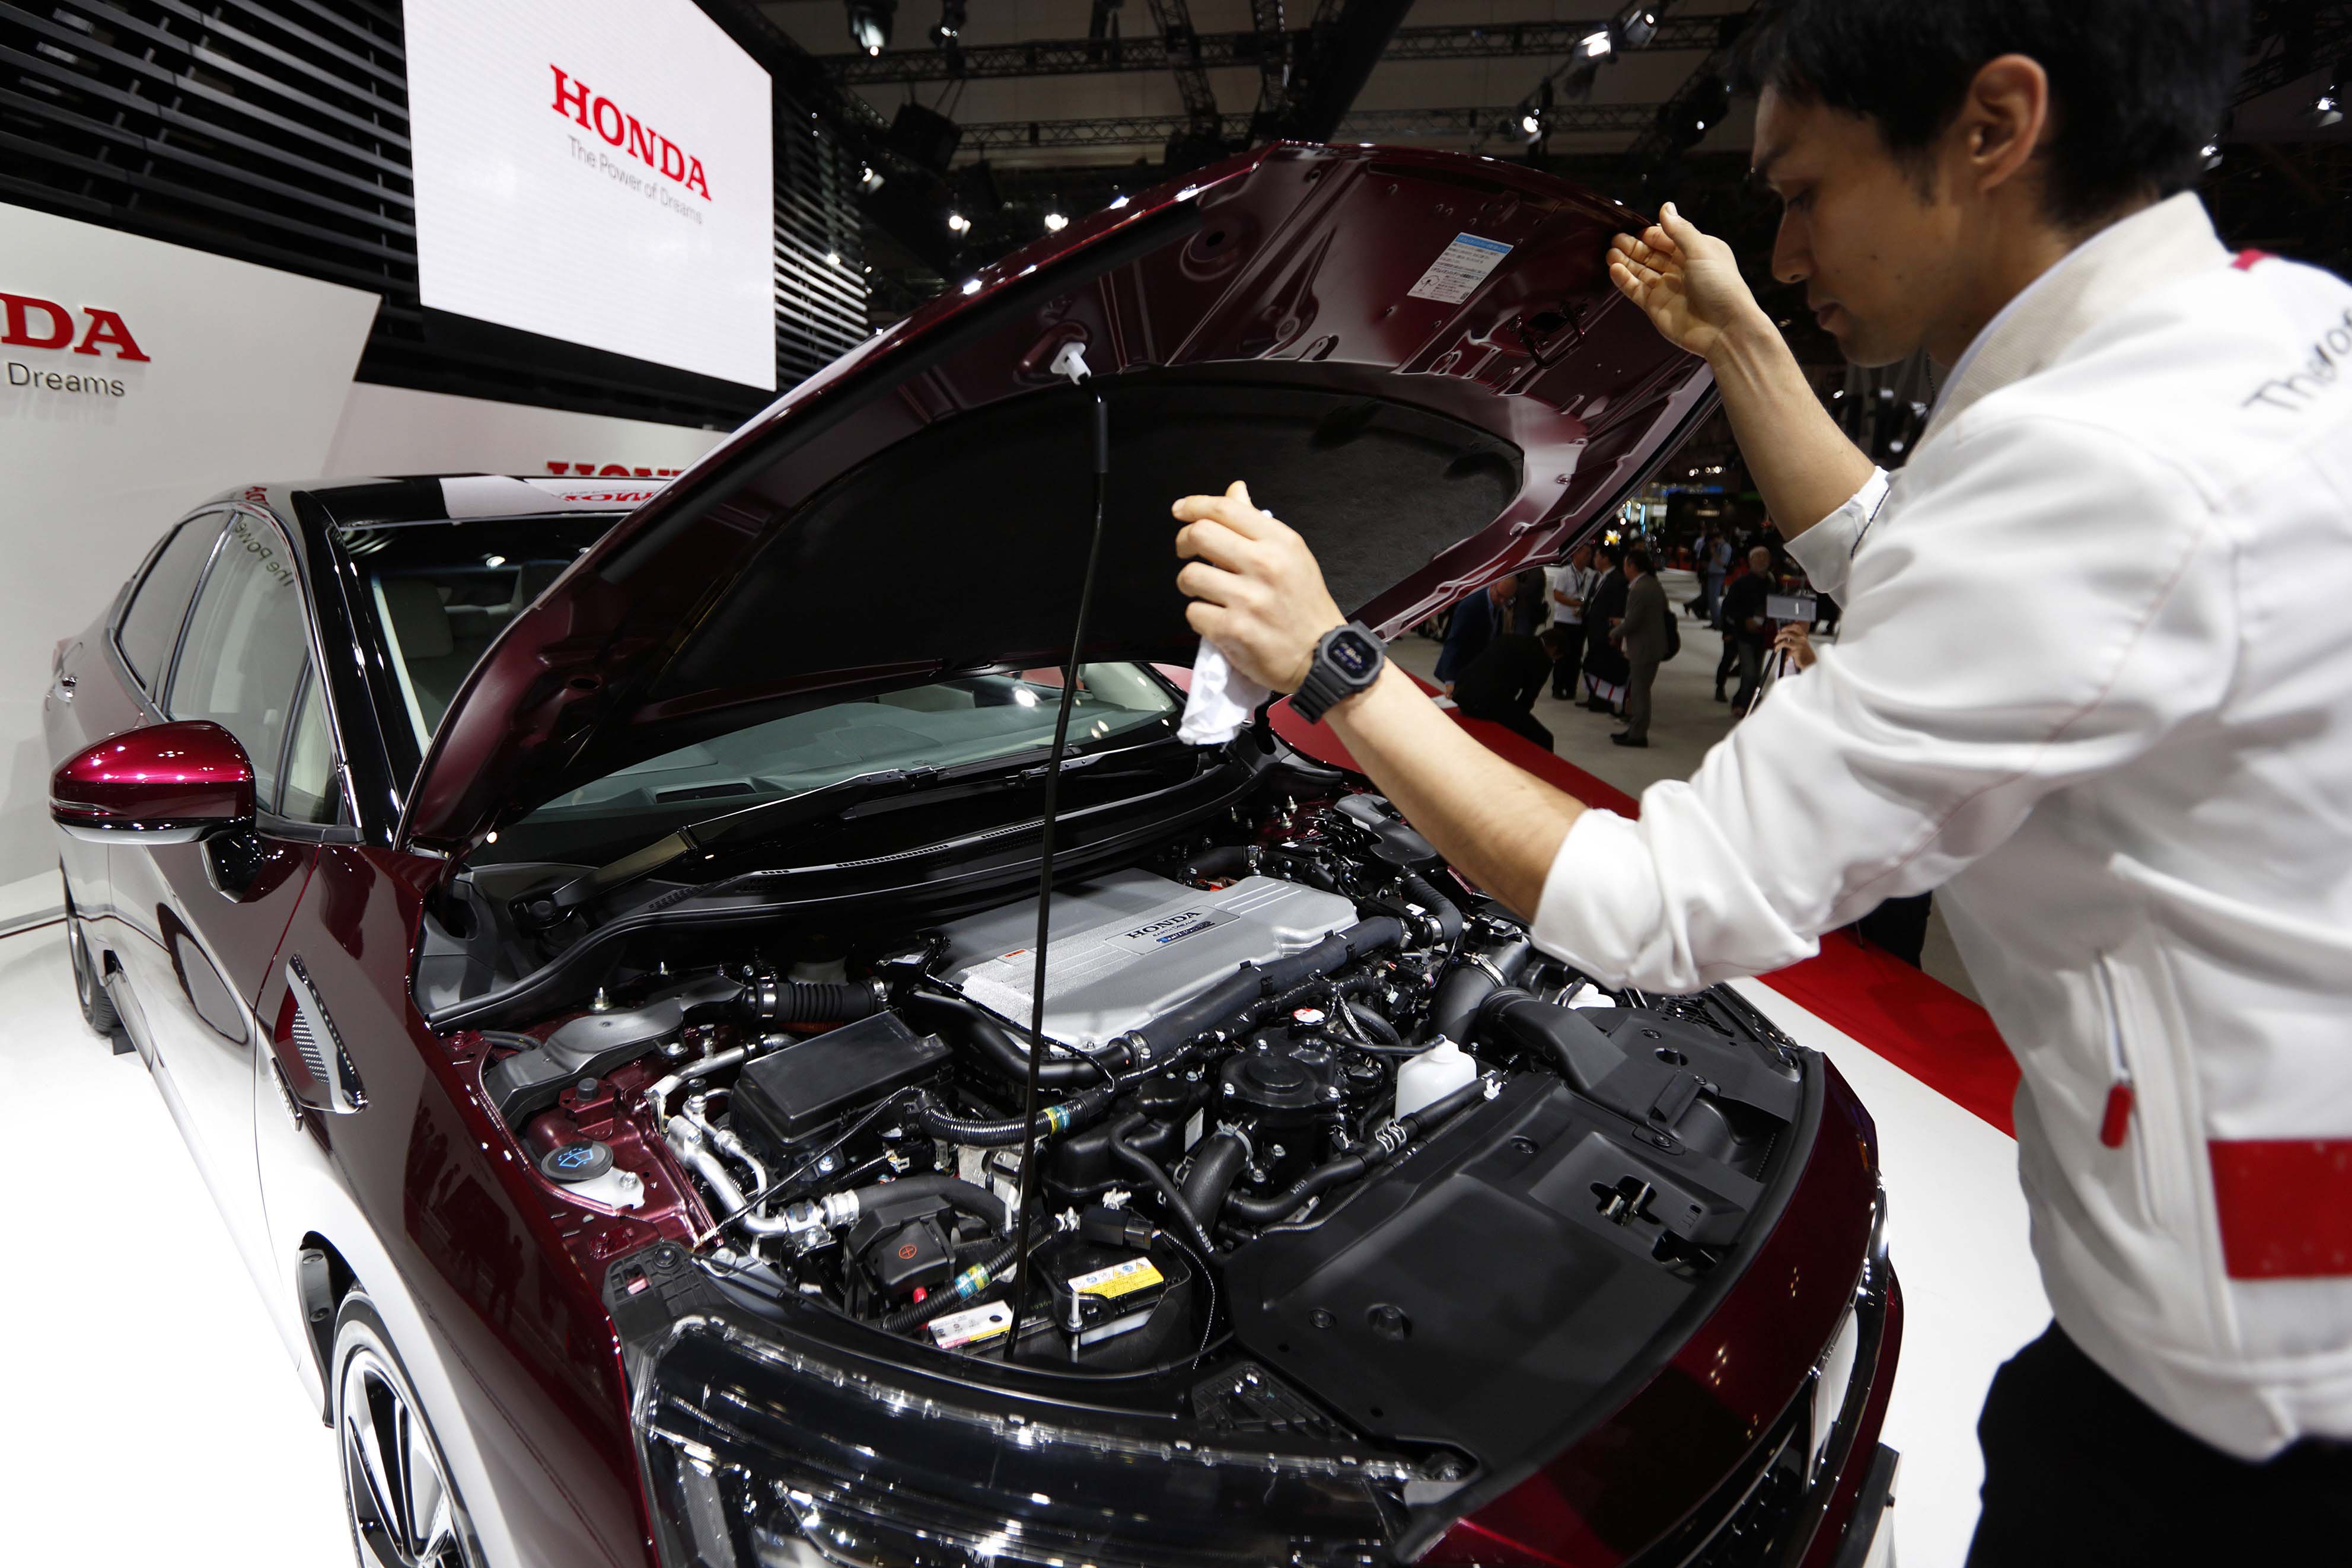 An attendant opens the hood of a Honda Motor Co. FCX Clarity fuel cell vehicle to show the hydrogen tank fitted inside, at the Tokyo Motor Show in October. | BLOOMBERG